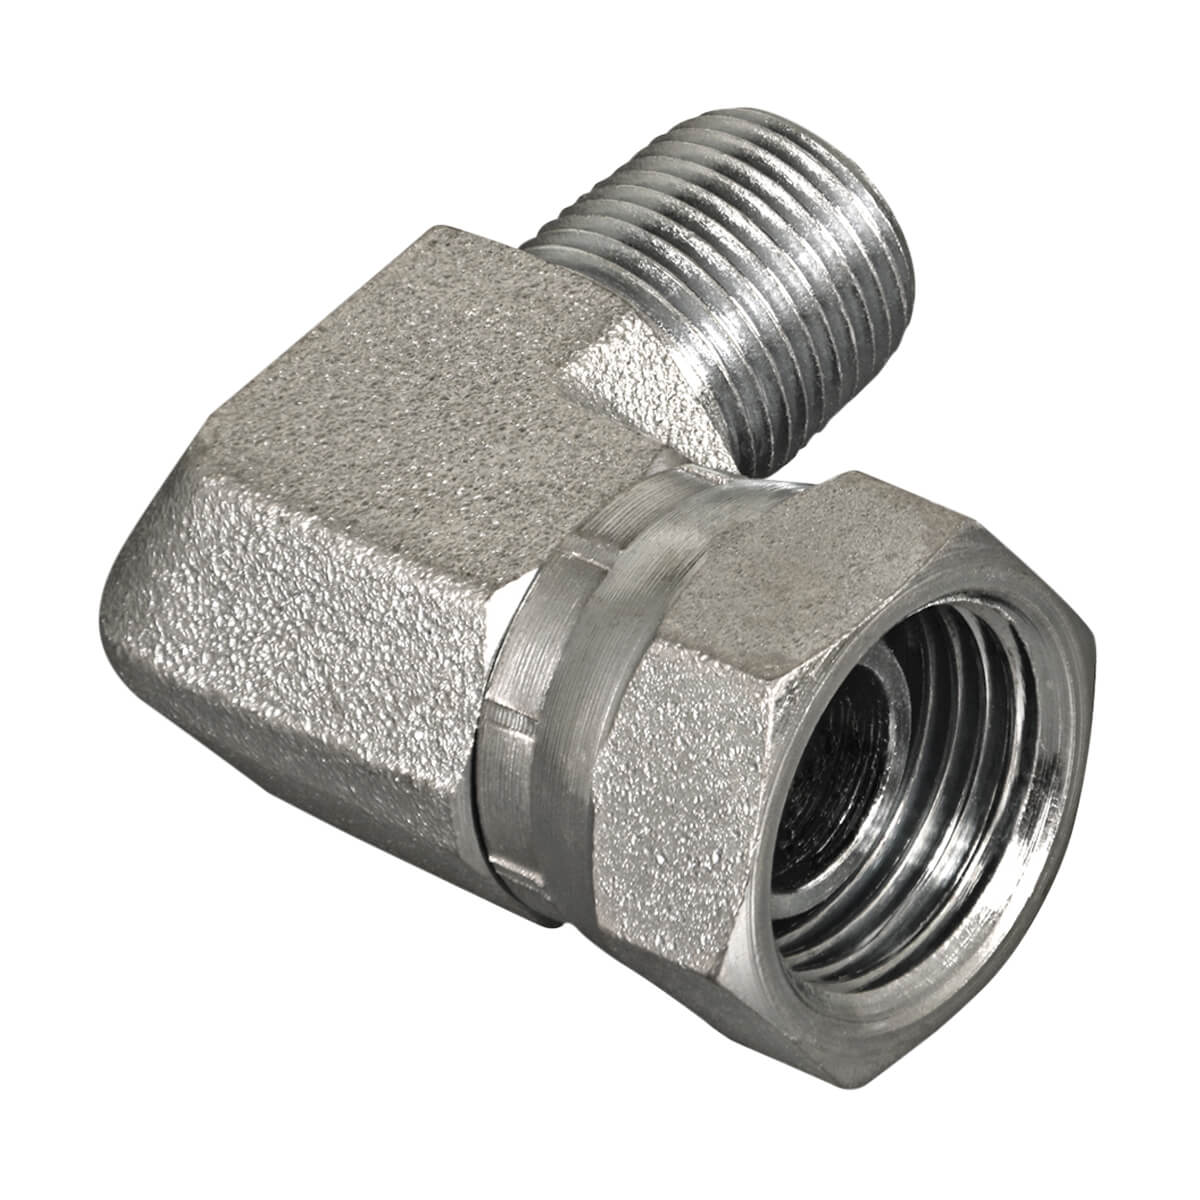 Swivel Hydraulic Adapter - 1/2-in MPT x 1/2-in FPT 90 Degree